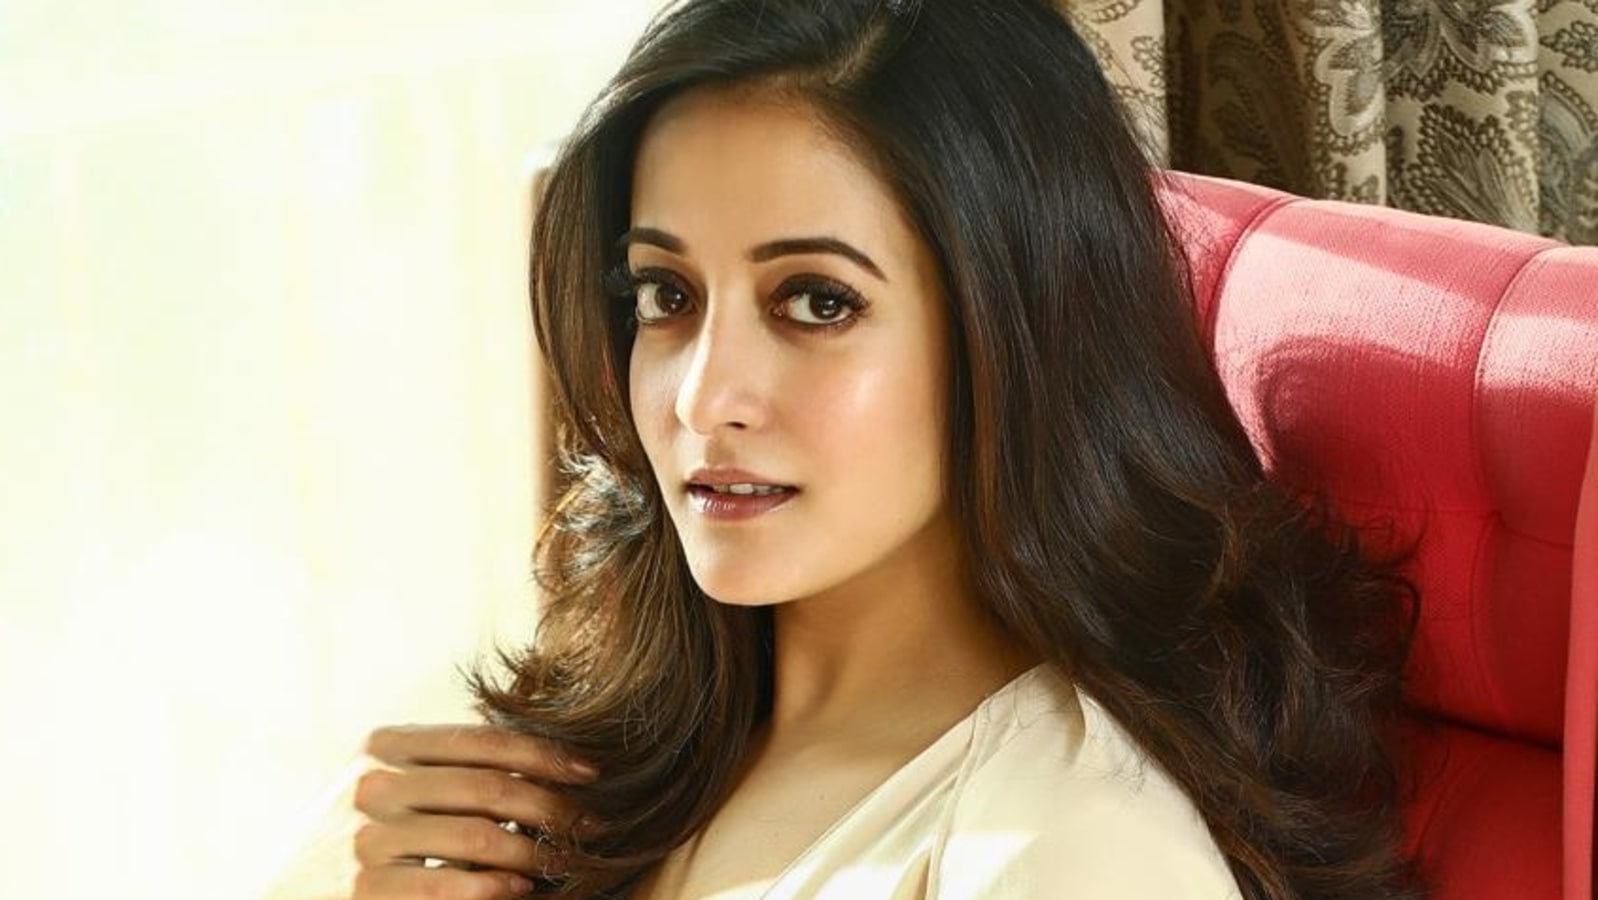 Raima Sen says ‘it’s very difficult’ for star kids when they start out: ‘For an outsider there is no baggage’